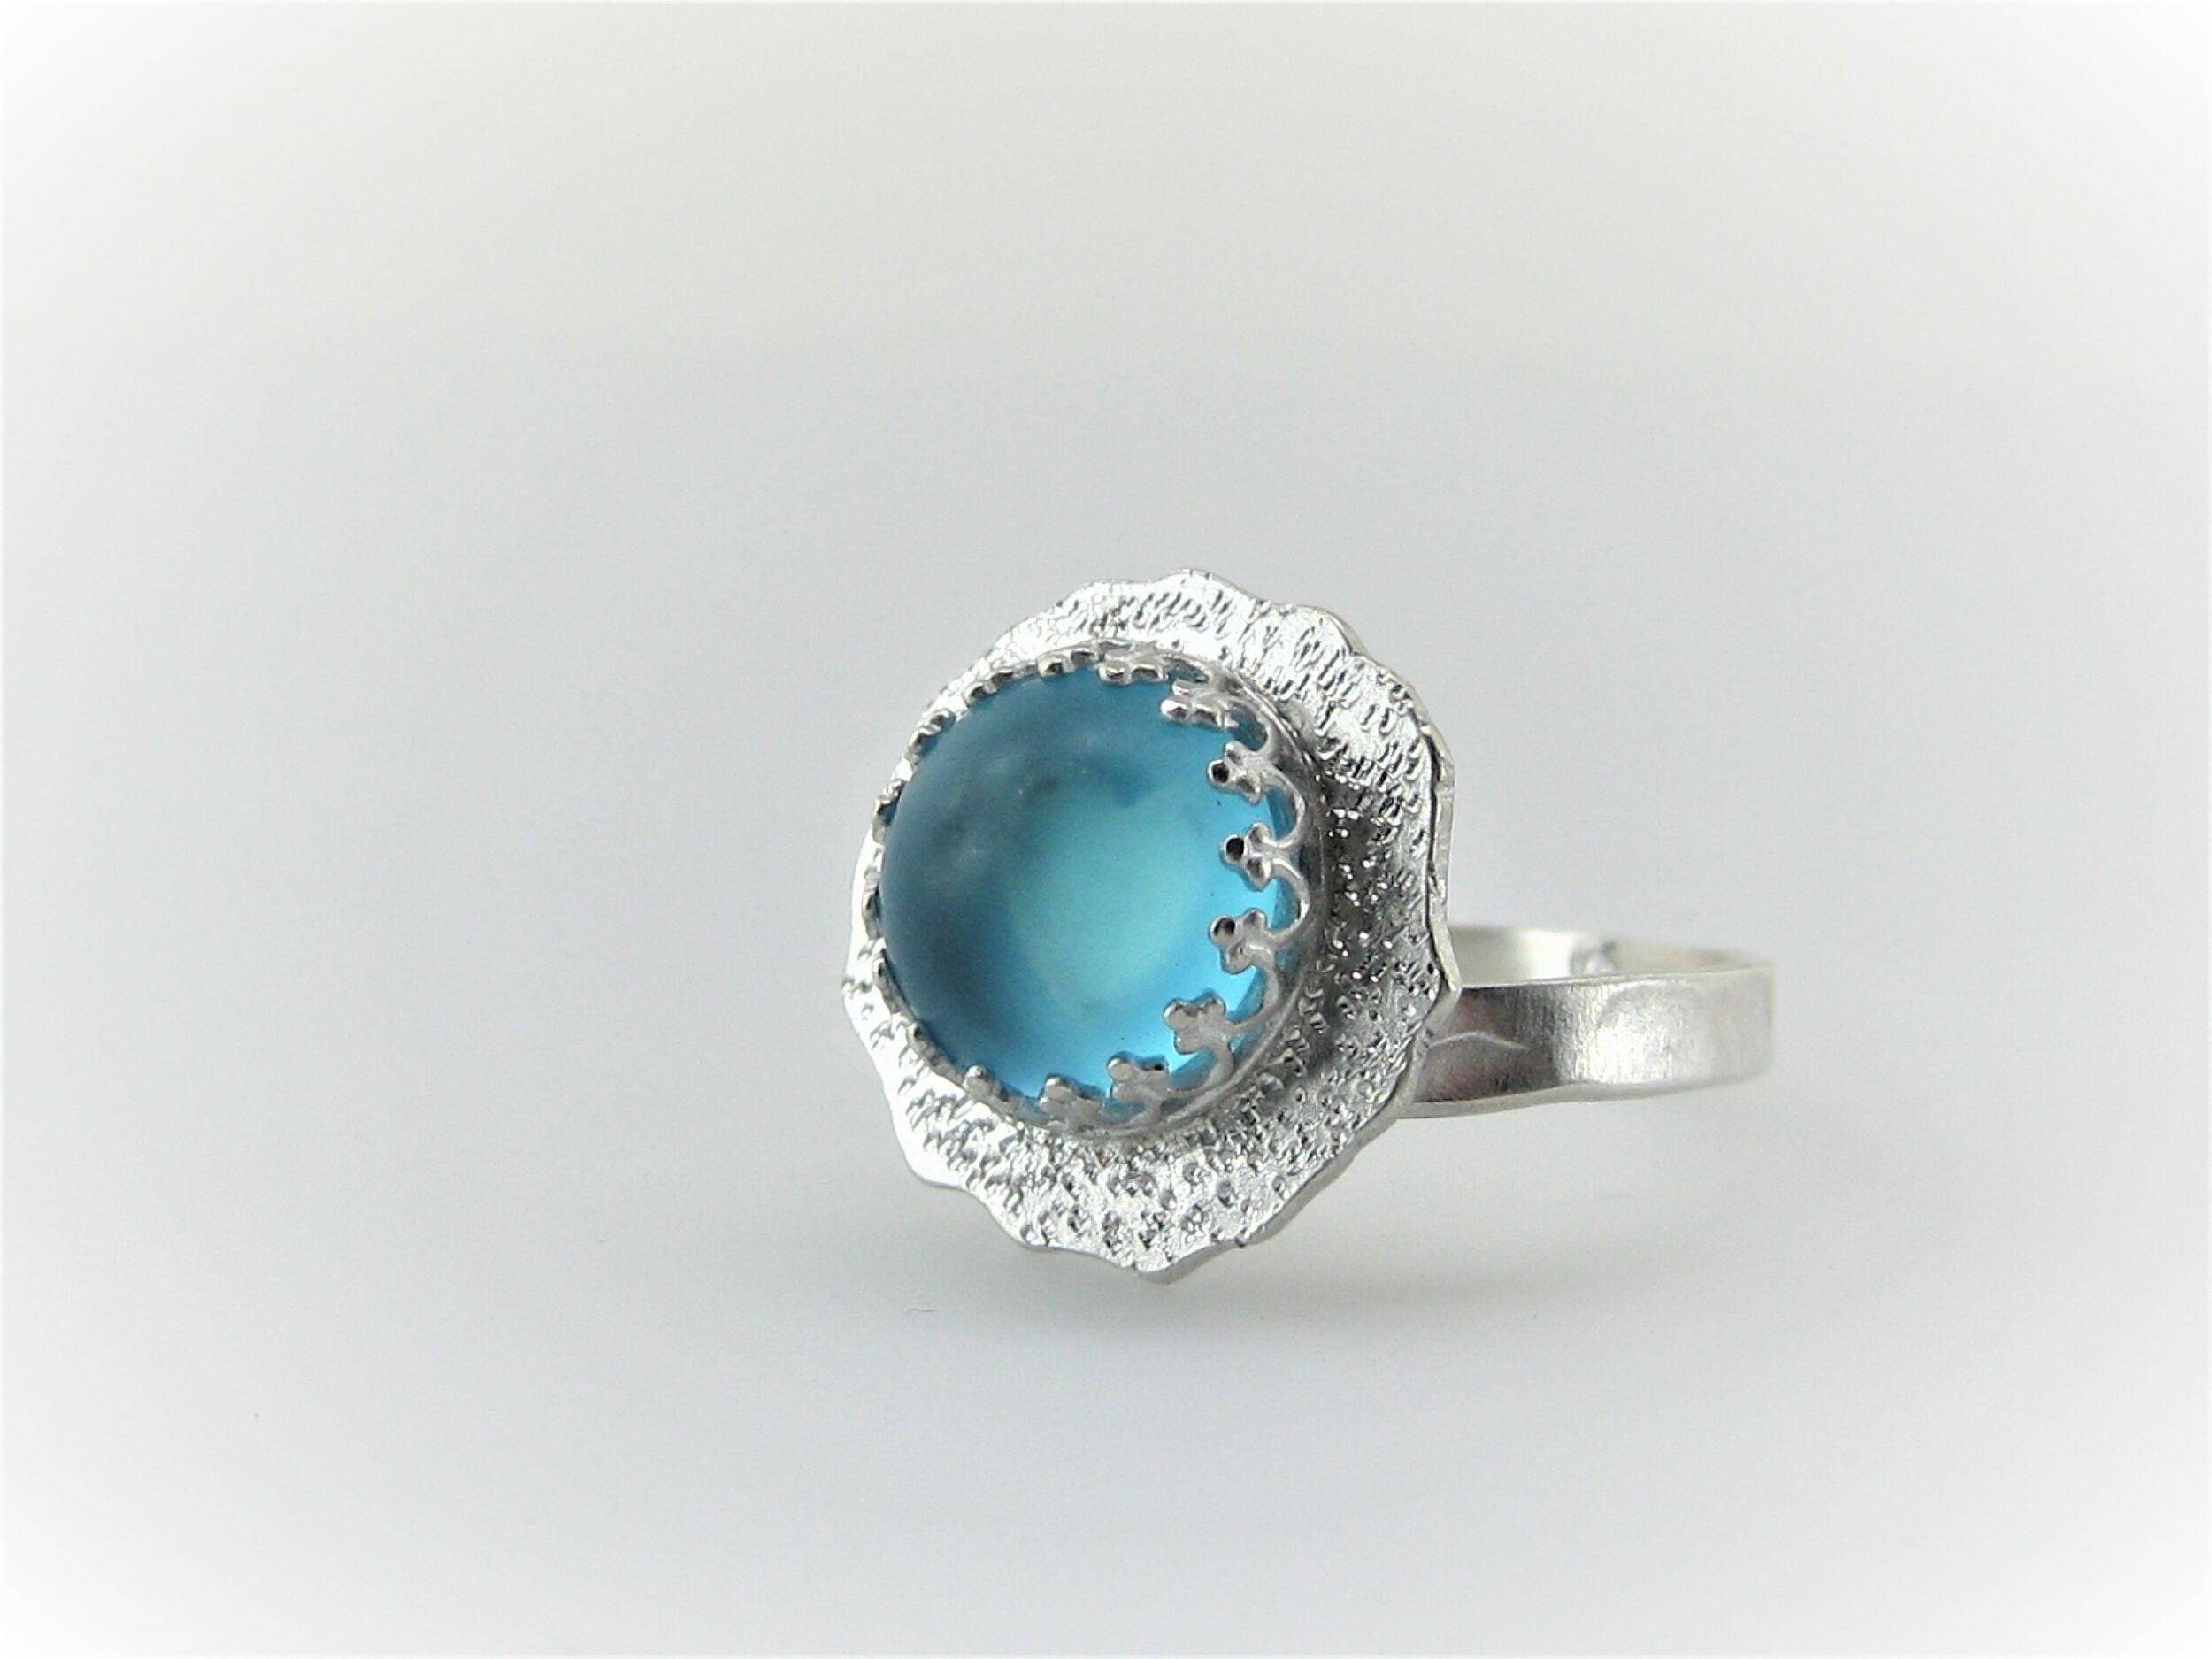 Lovely glow of vintage Czech glass with silver ring